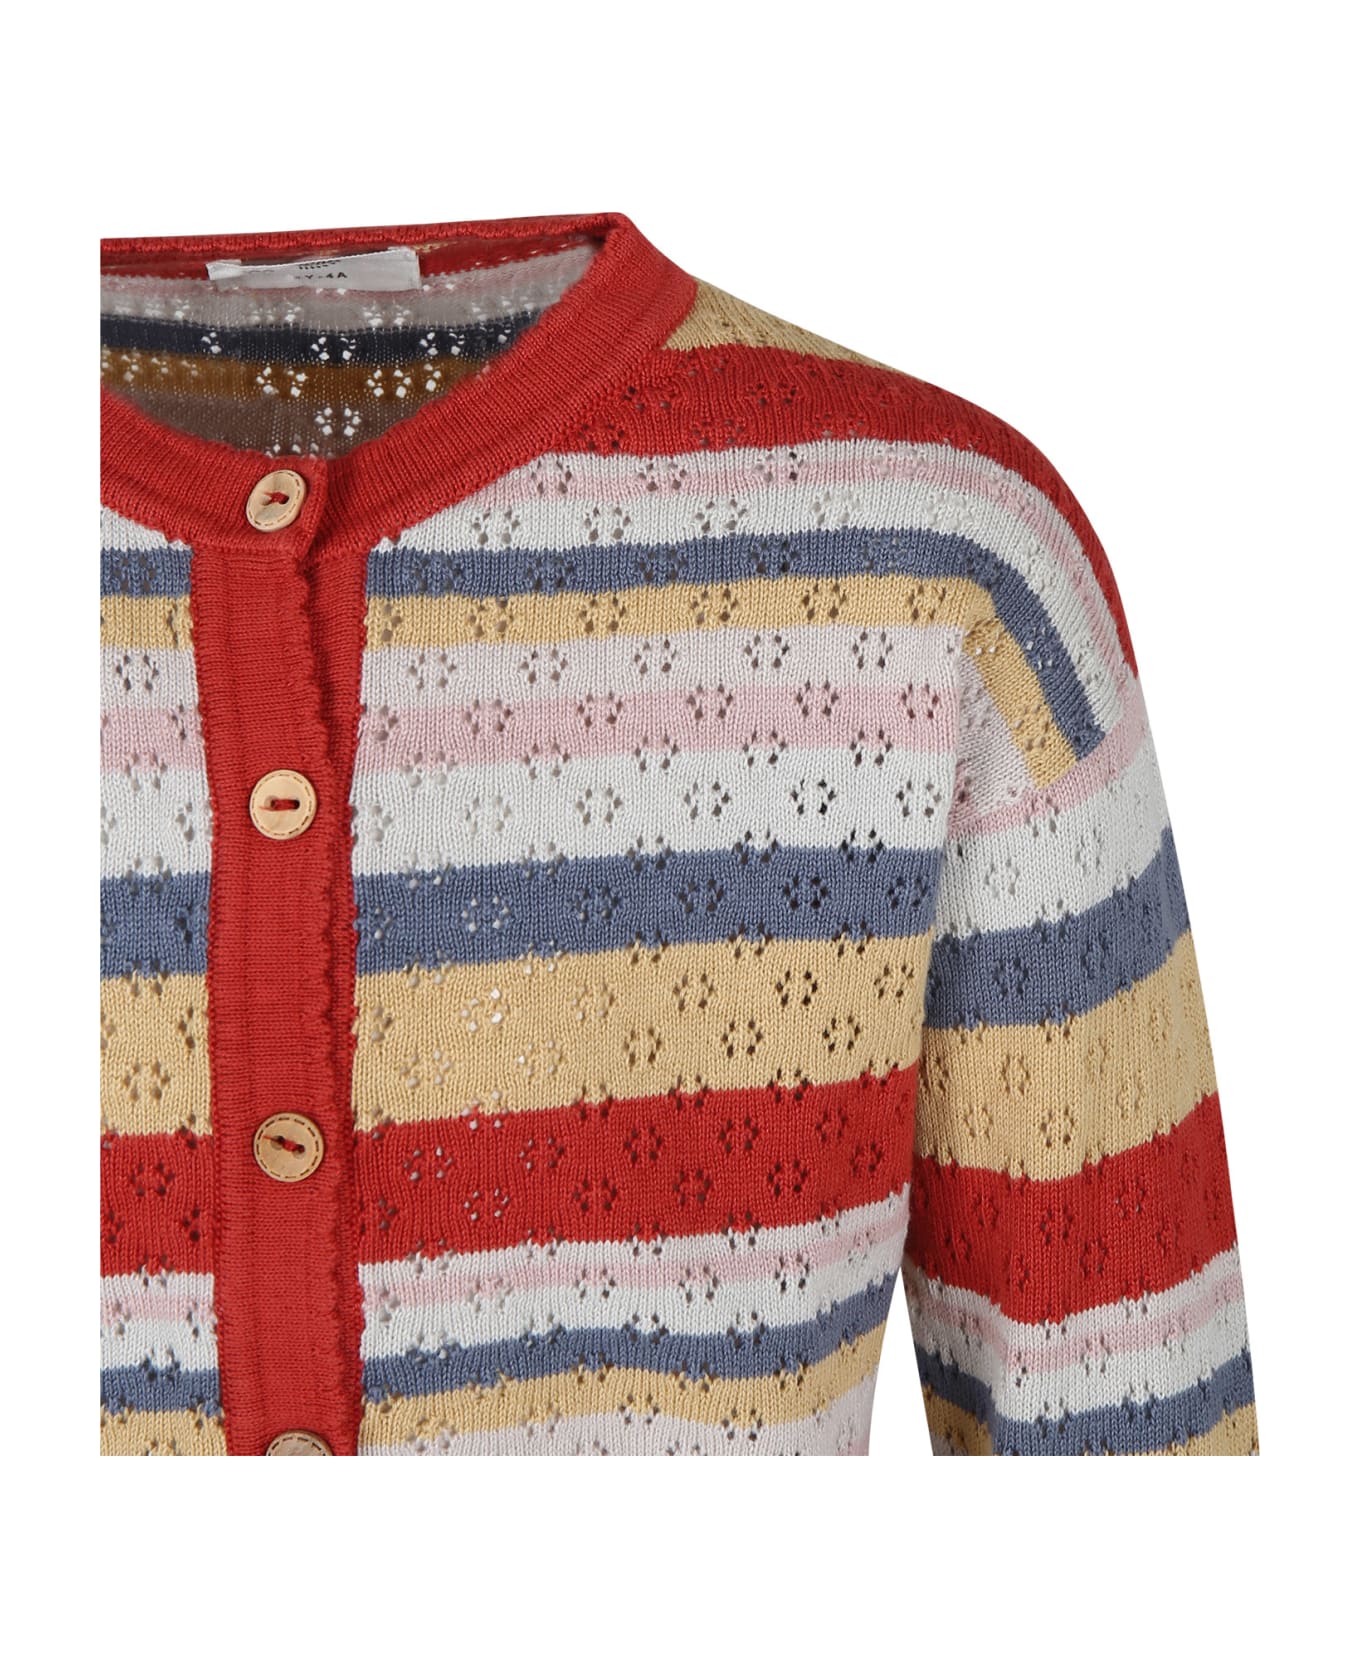 Coco Au Lait Red Cardigan For Girl With Striped Pattern - Multicolor ニットウェア＆スウェットシャツ